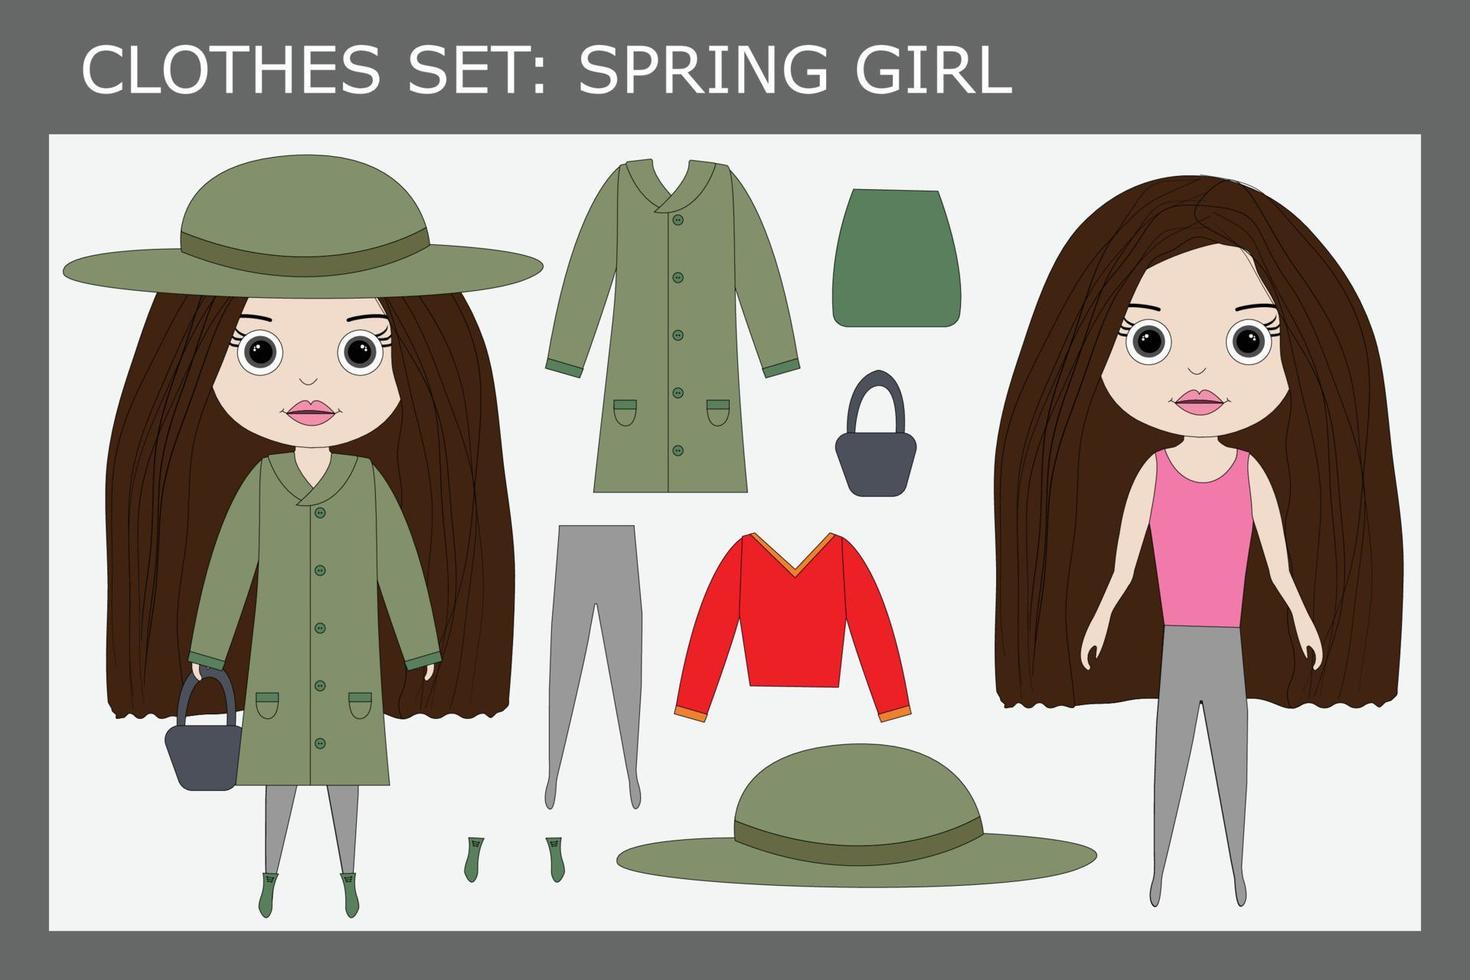 A set of clothes for a little beautiful girl in the spring vector